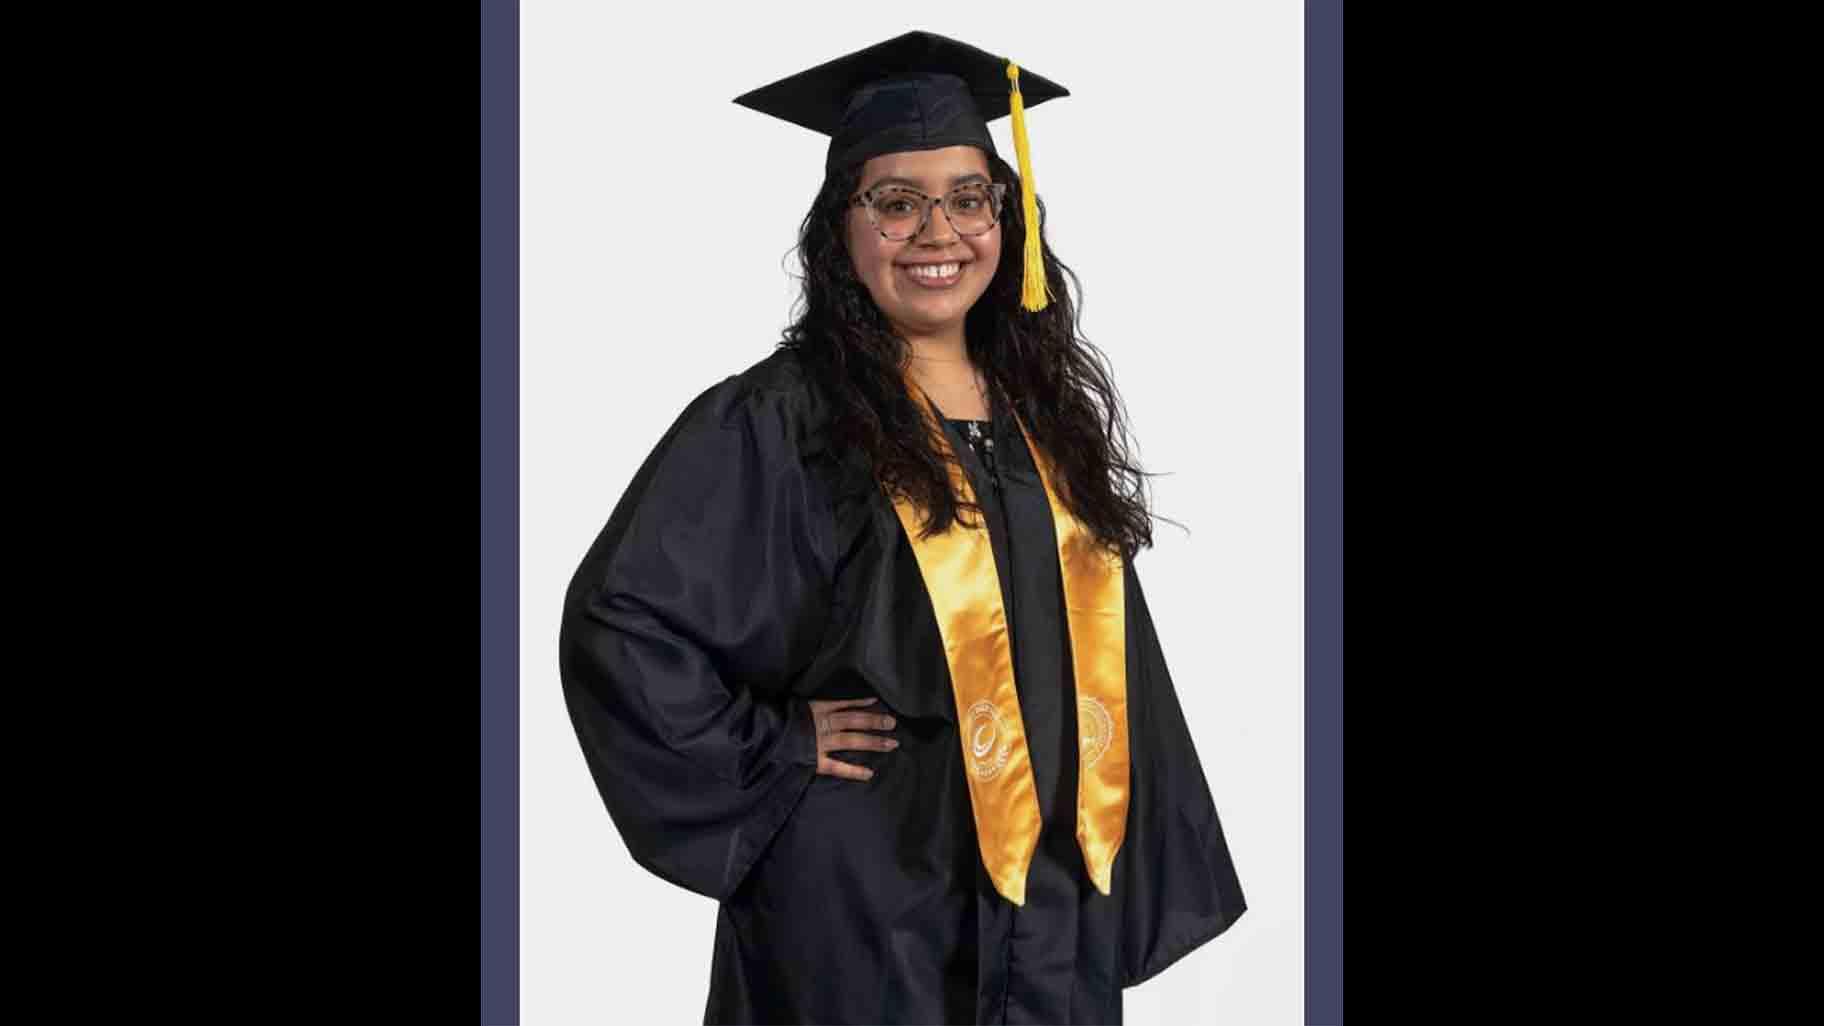 Ruth Flores, 2022 Richard J. Daley College valedictorian, went straight to Daley after graduating from a CPS high school. She said her choice to attend a city college was grounded in a desire to remain close to home and family. (Courtesy City Colleges of Chicago)